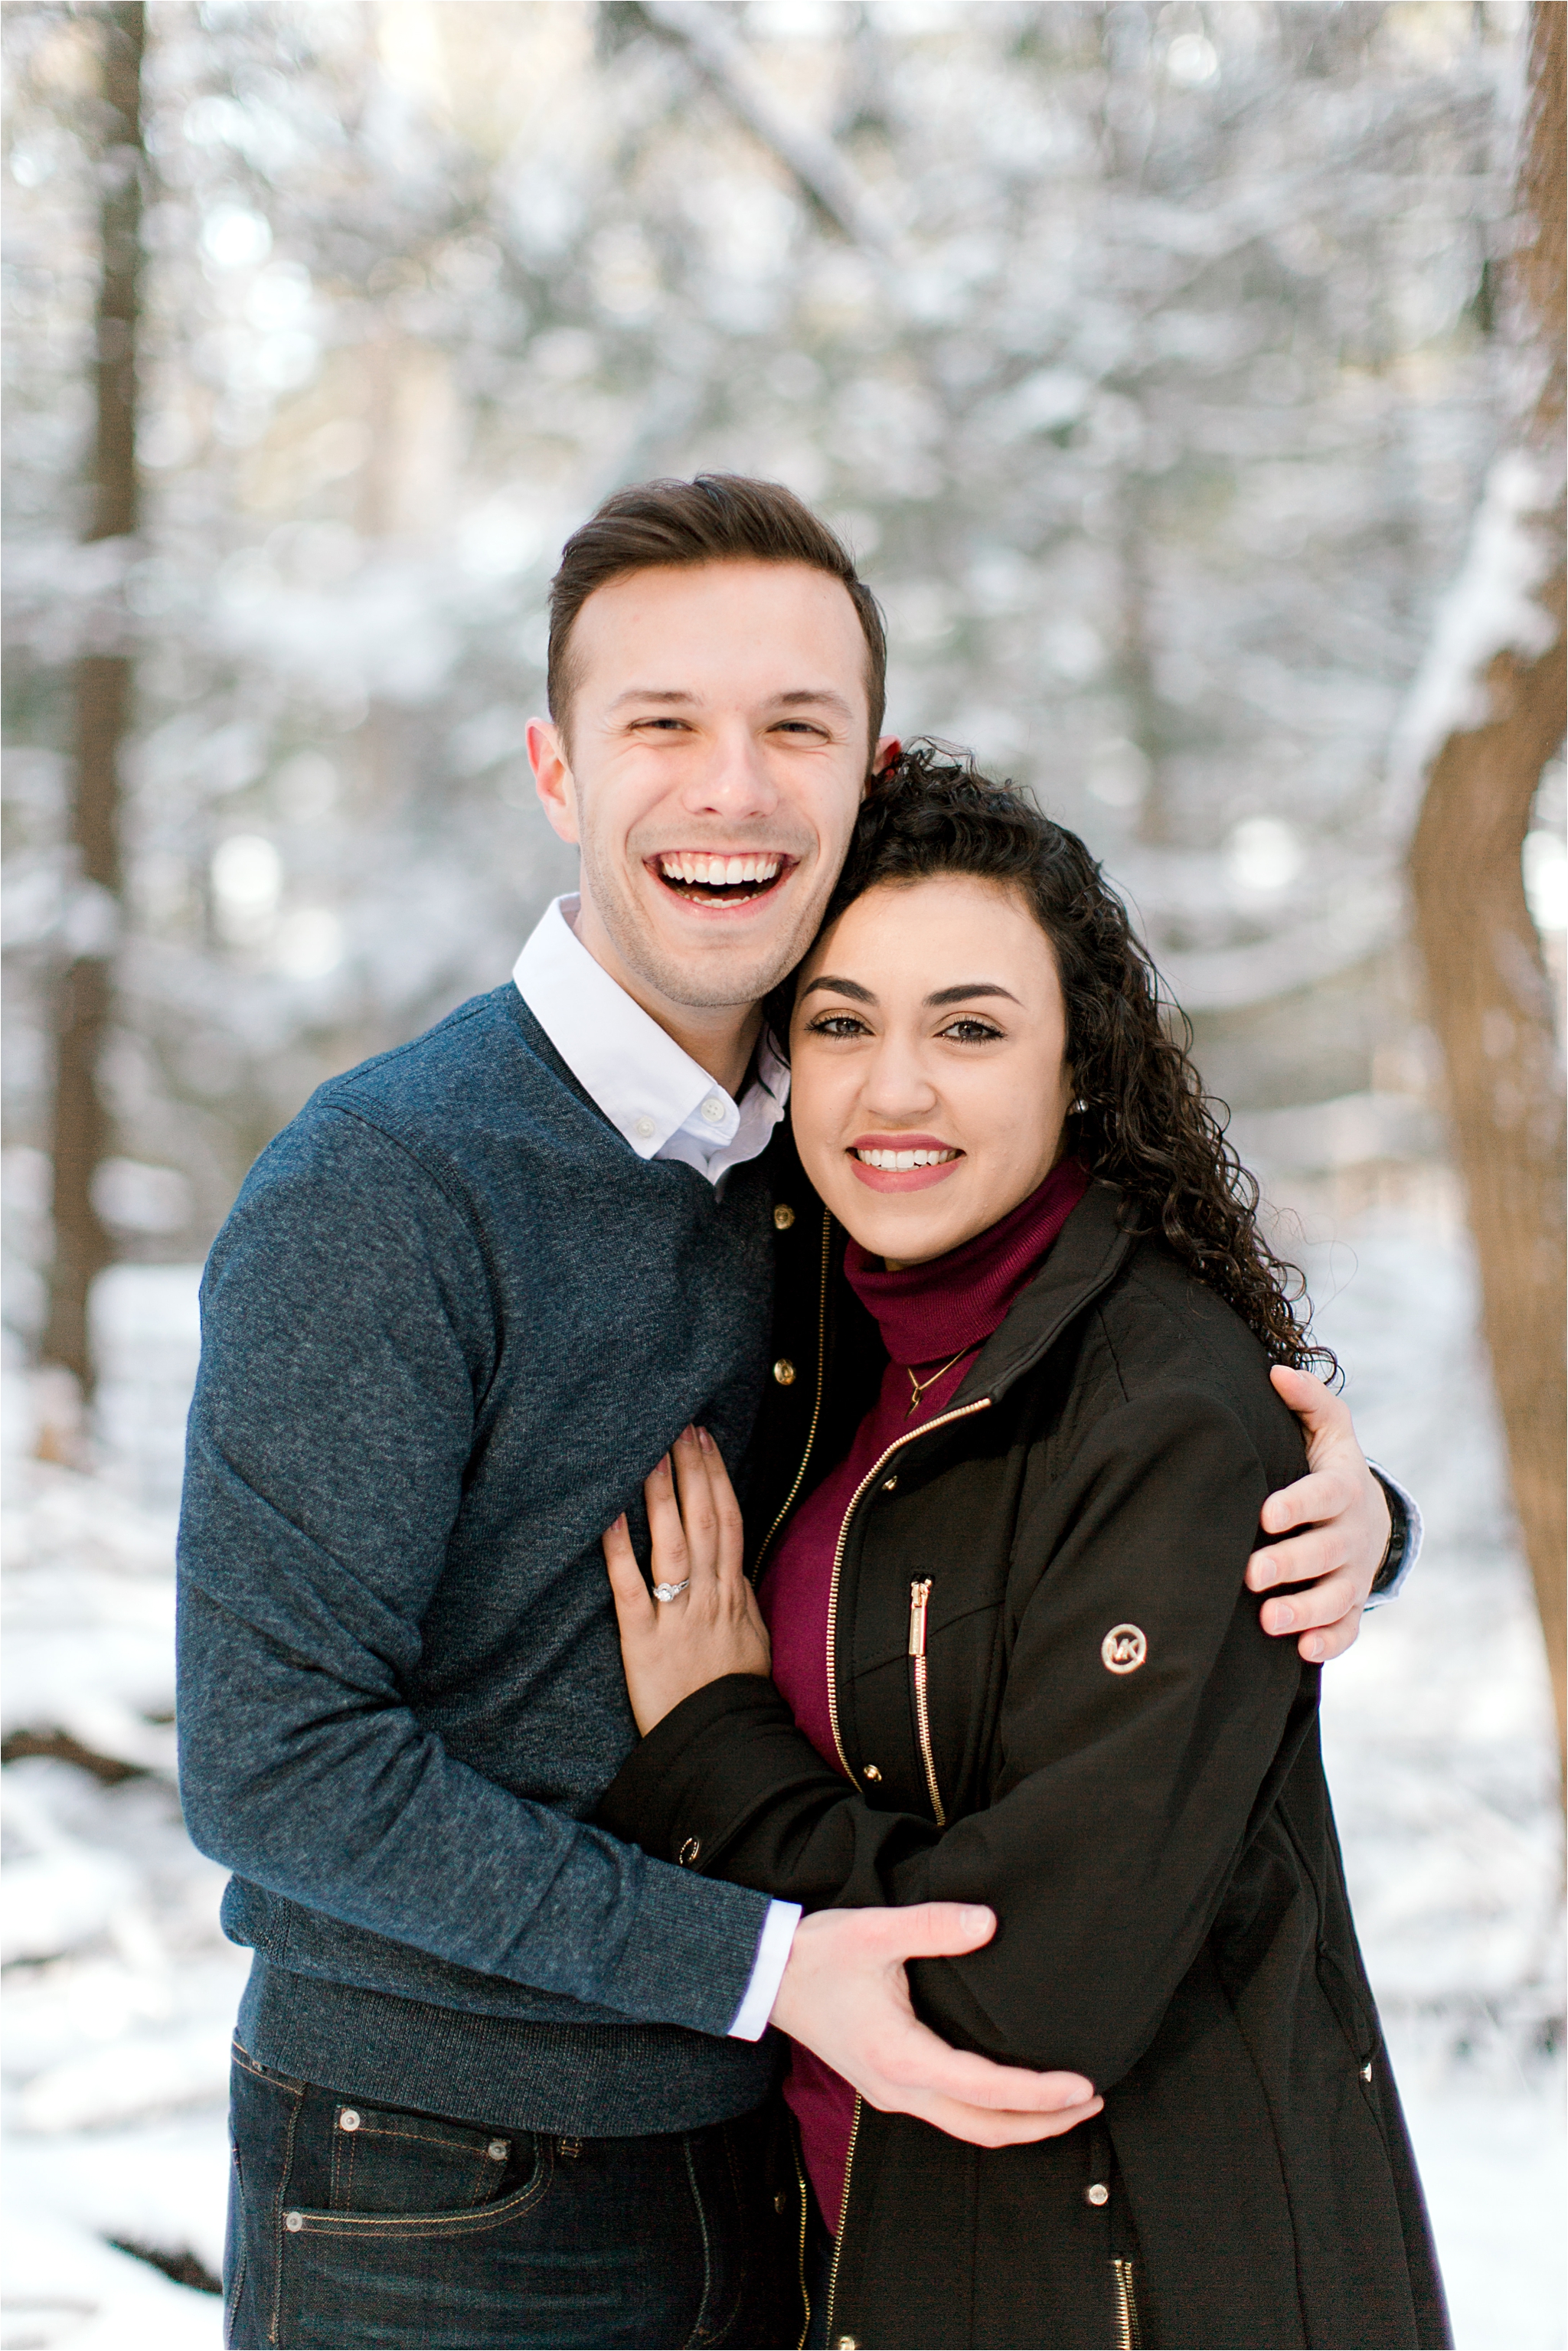 Winter engagement session at Cuyahoga Valley National Park